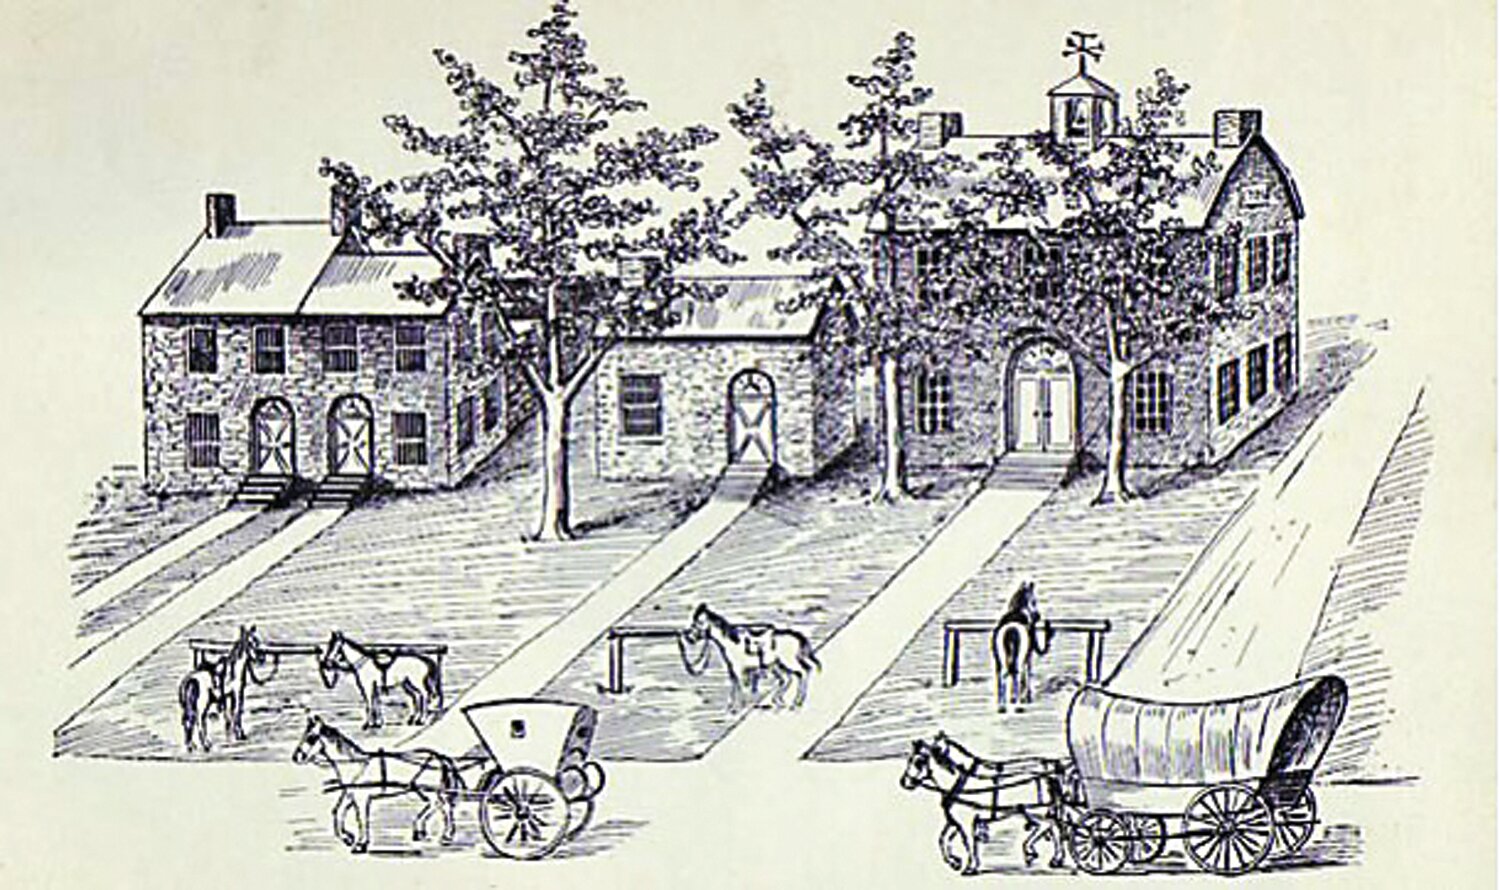 This sketch shows the Bucks County courthouse and government buildings as they stood in 1815. The sketch depicts, from left, the jail and keeper’s house, the Treasury building and the courthouse.